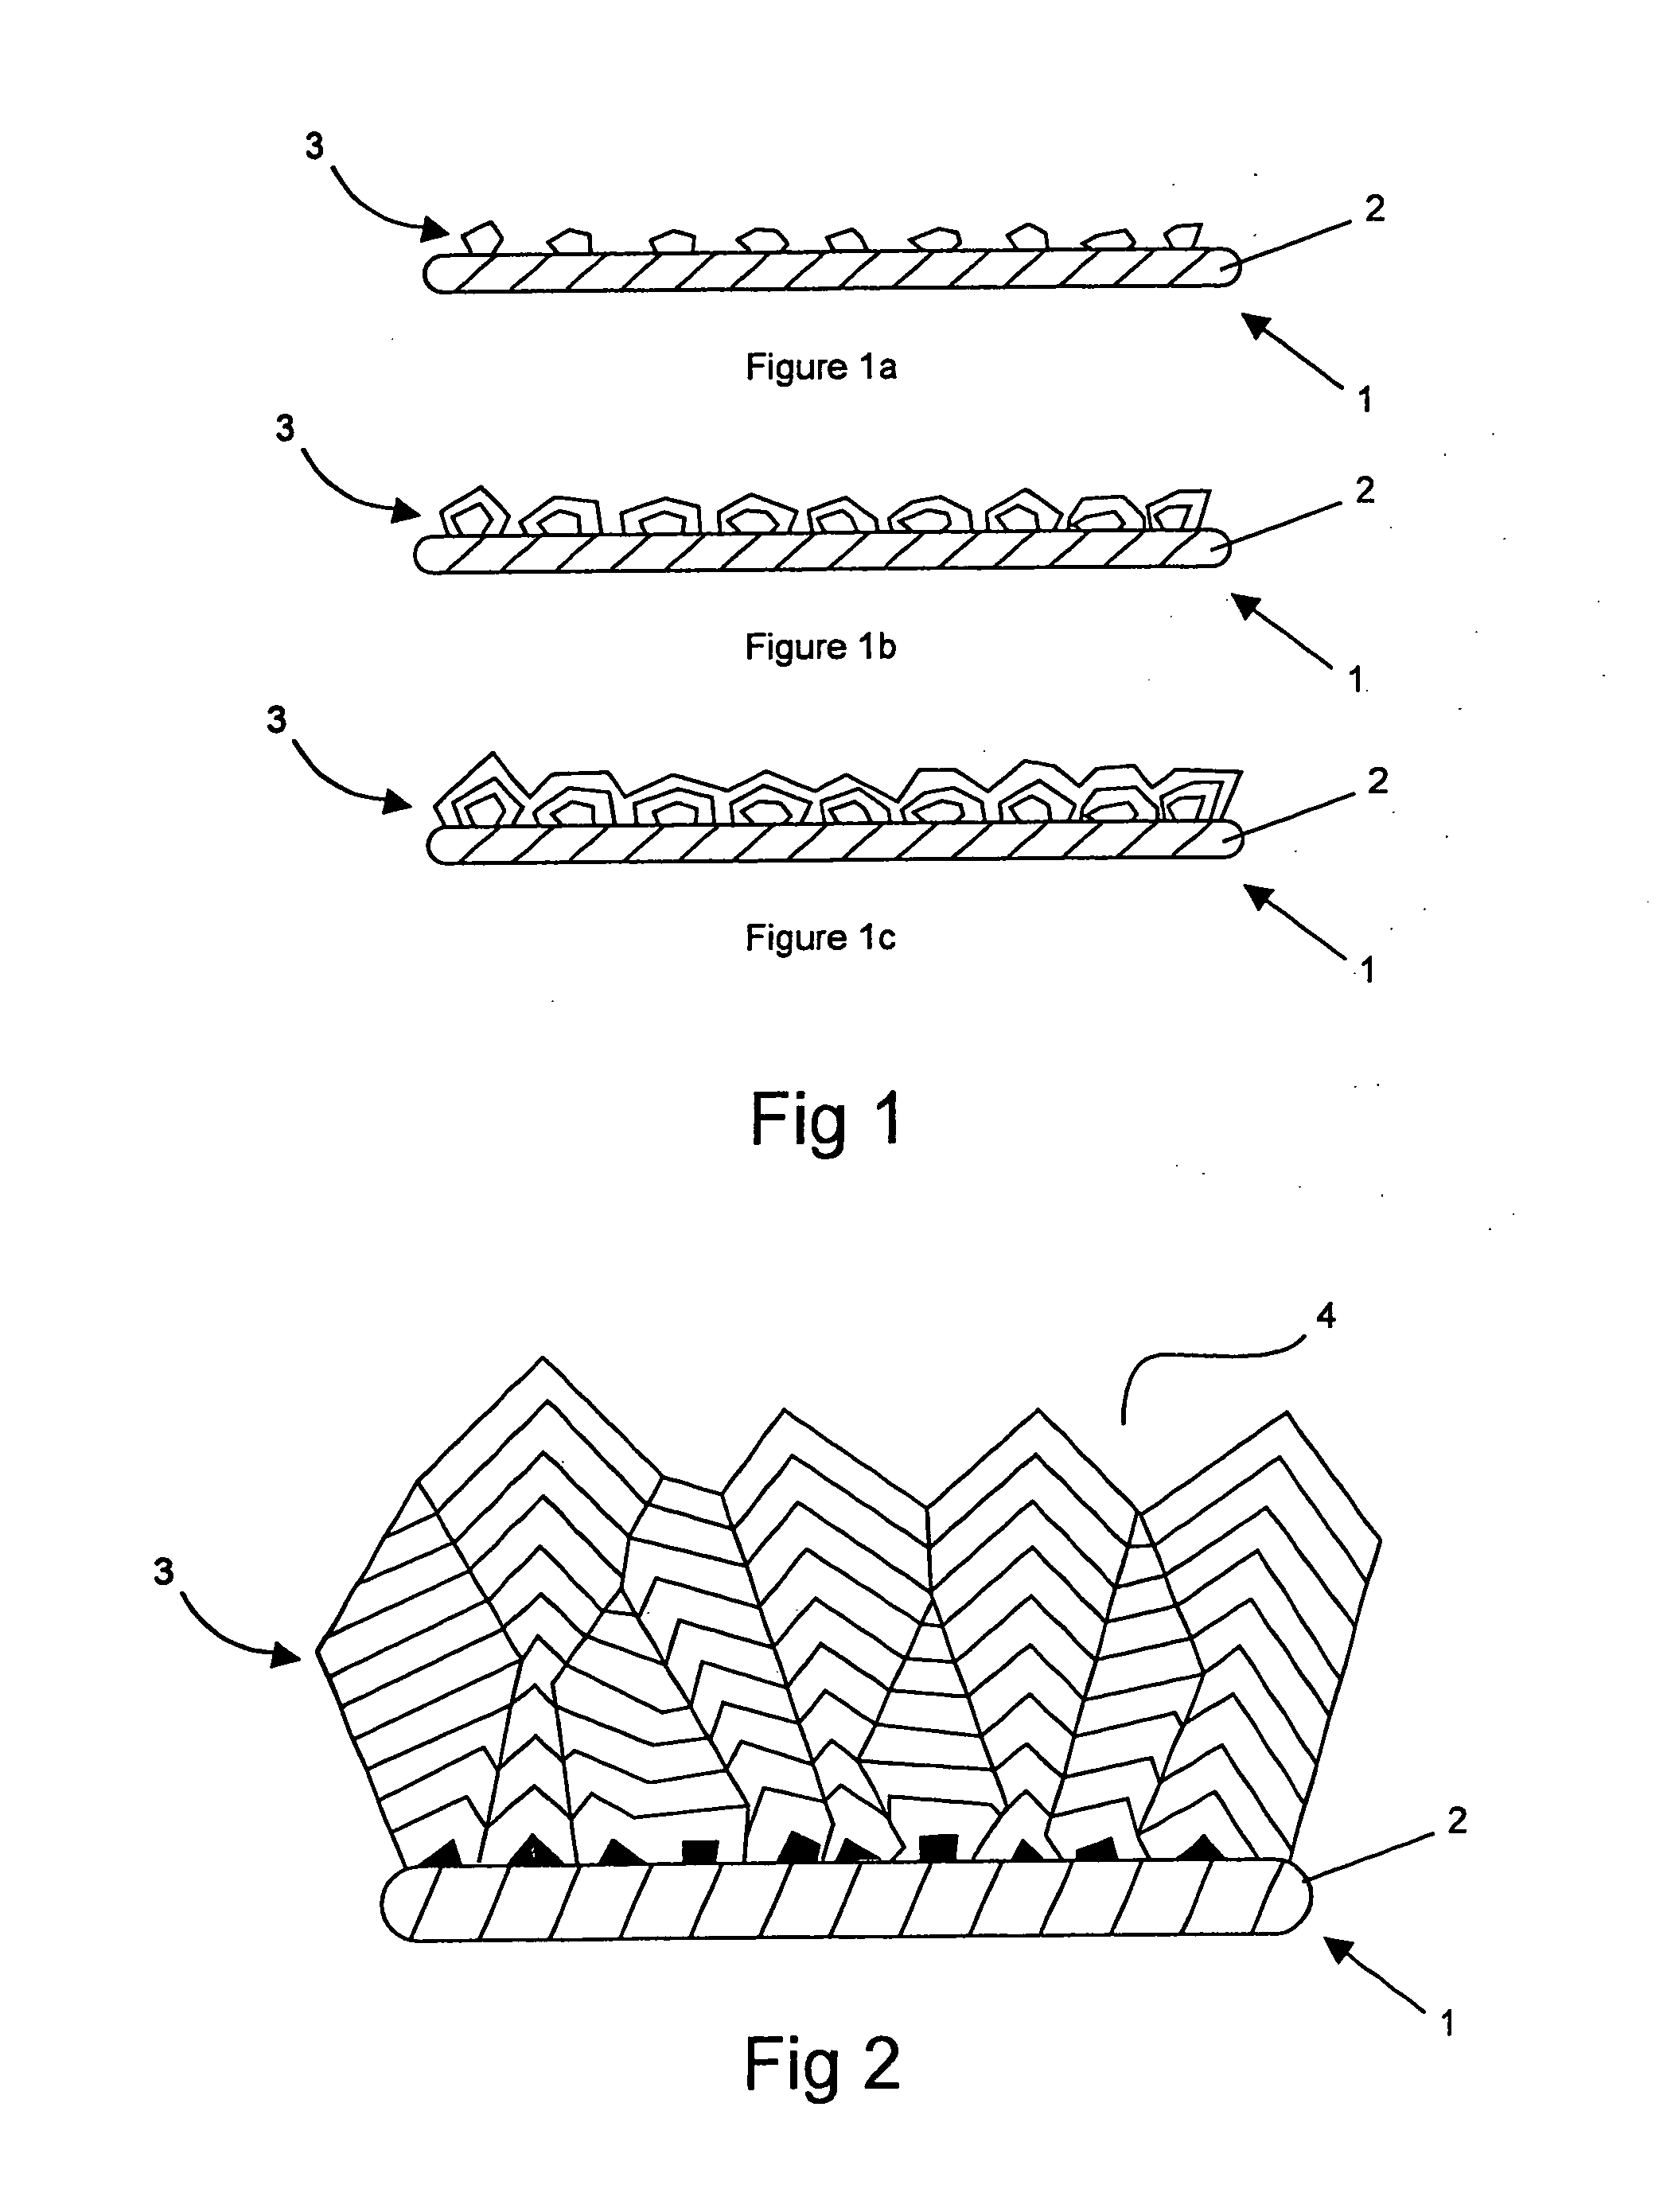 Casting method for producing surface acoustic wave devices